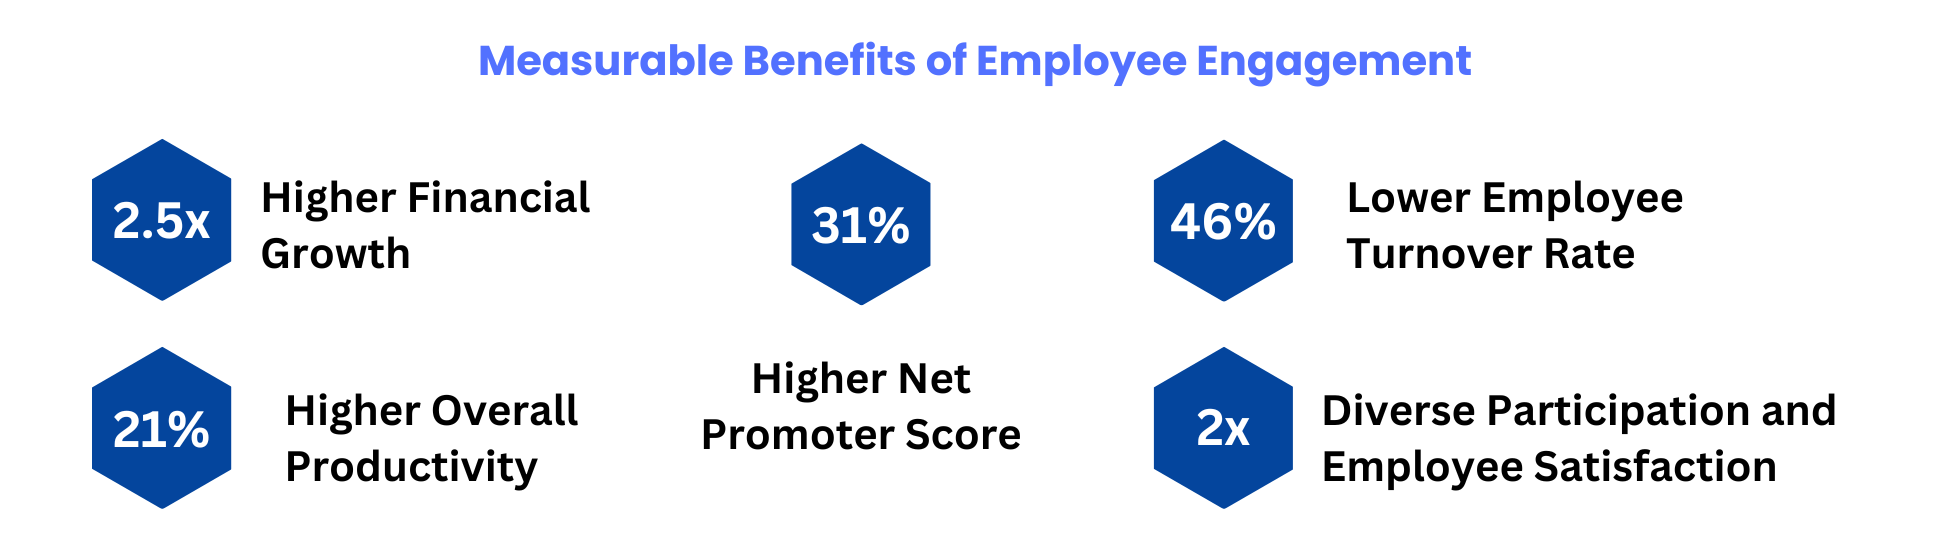 benefits-of-employee-engagement-why-is-employee-engagement-important